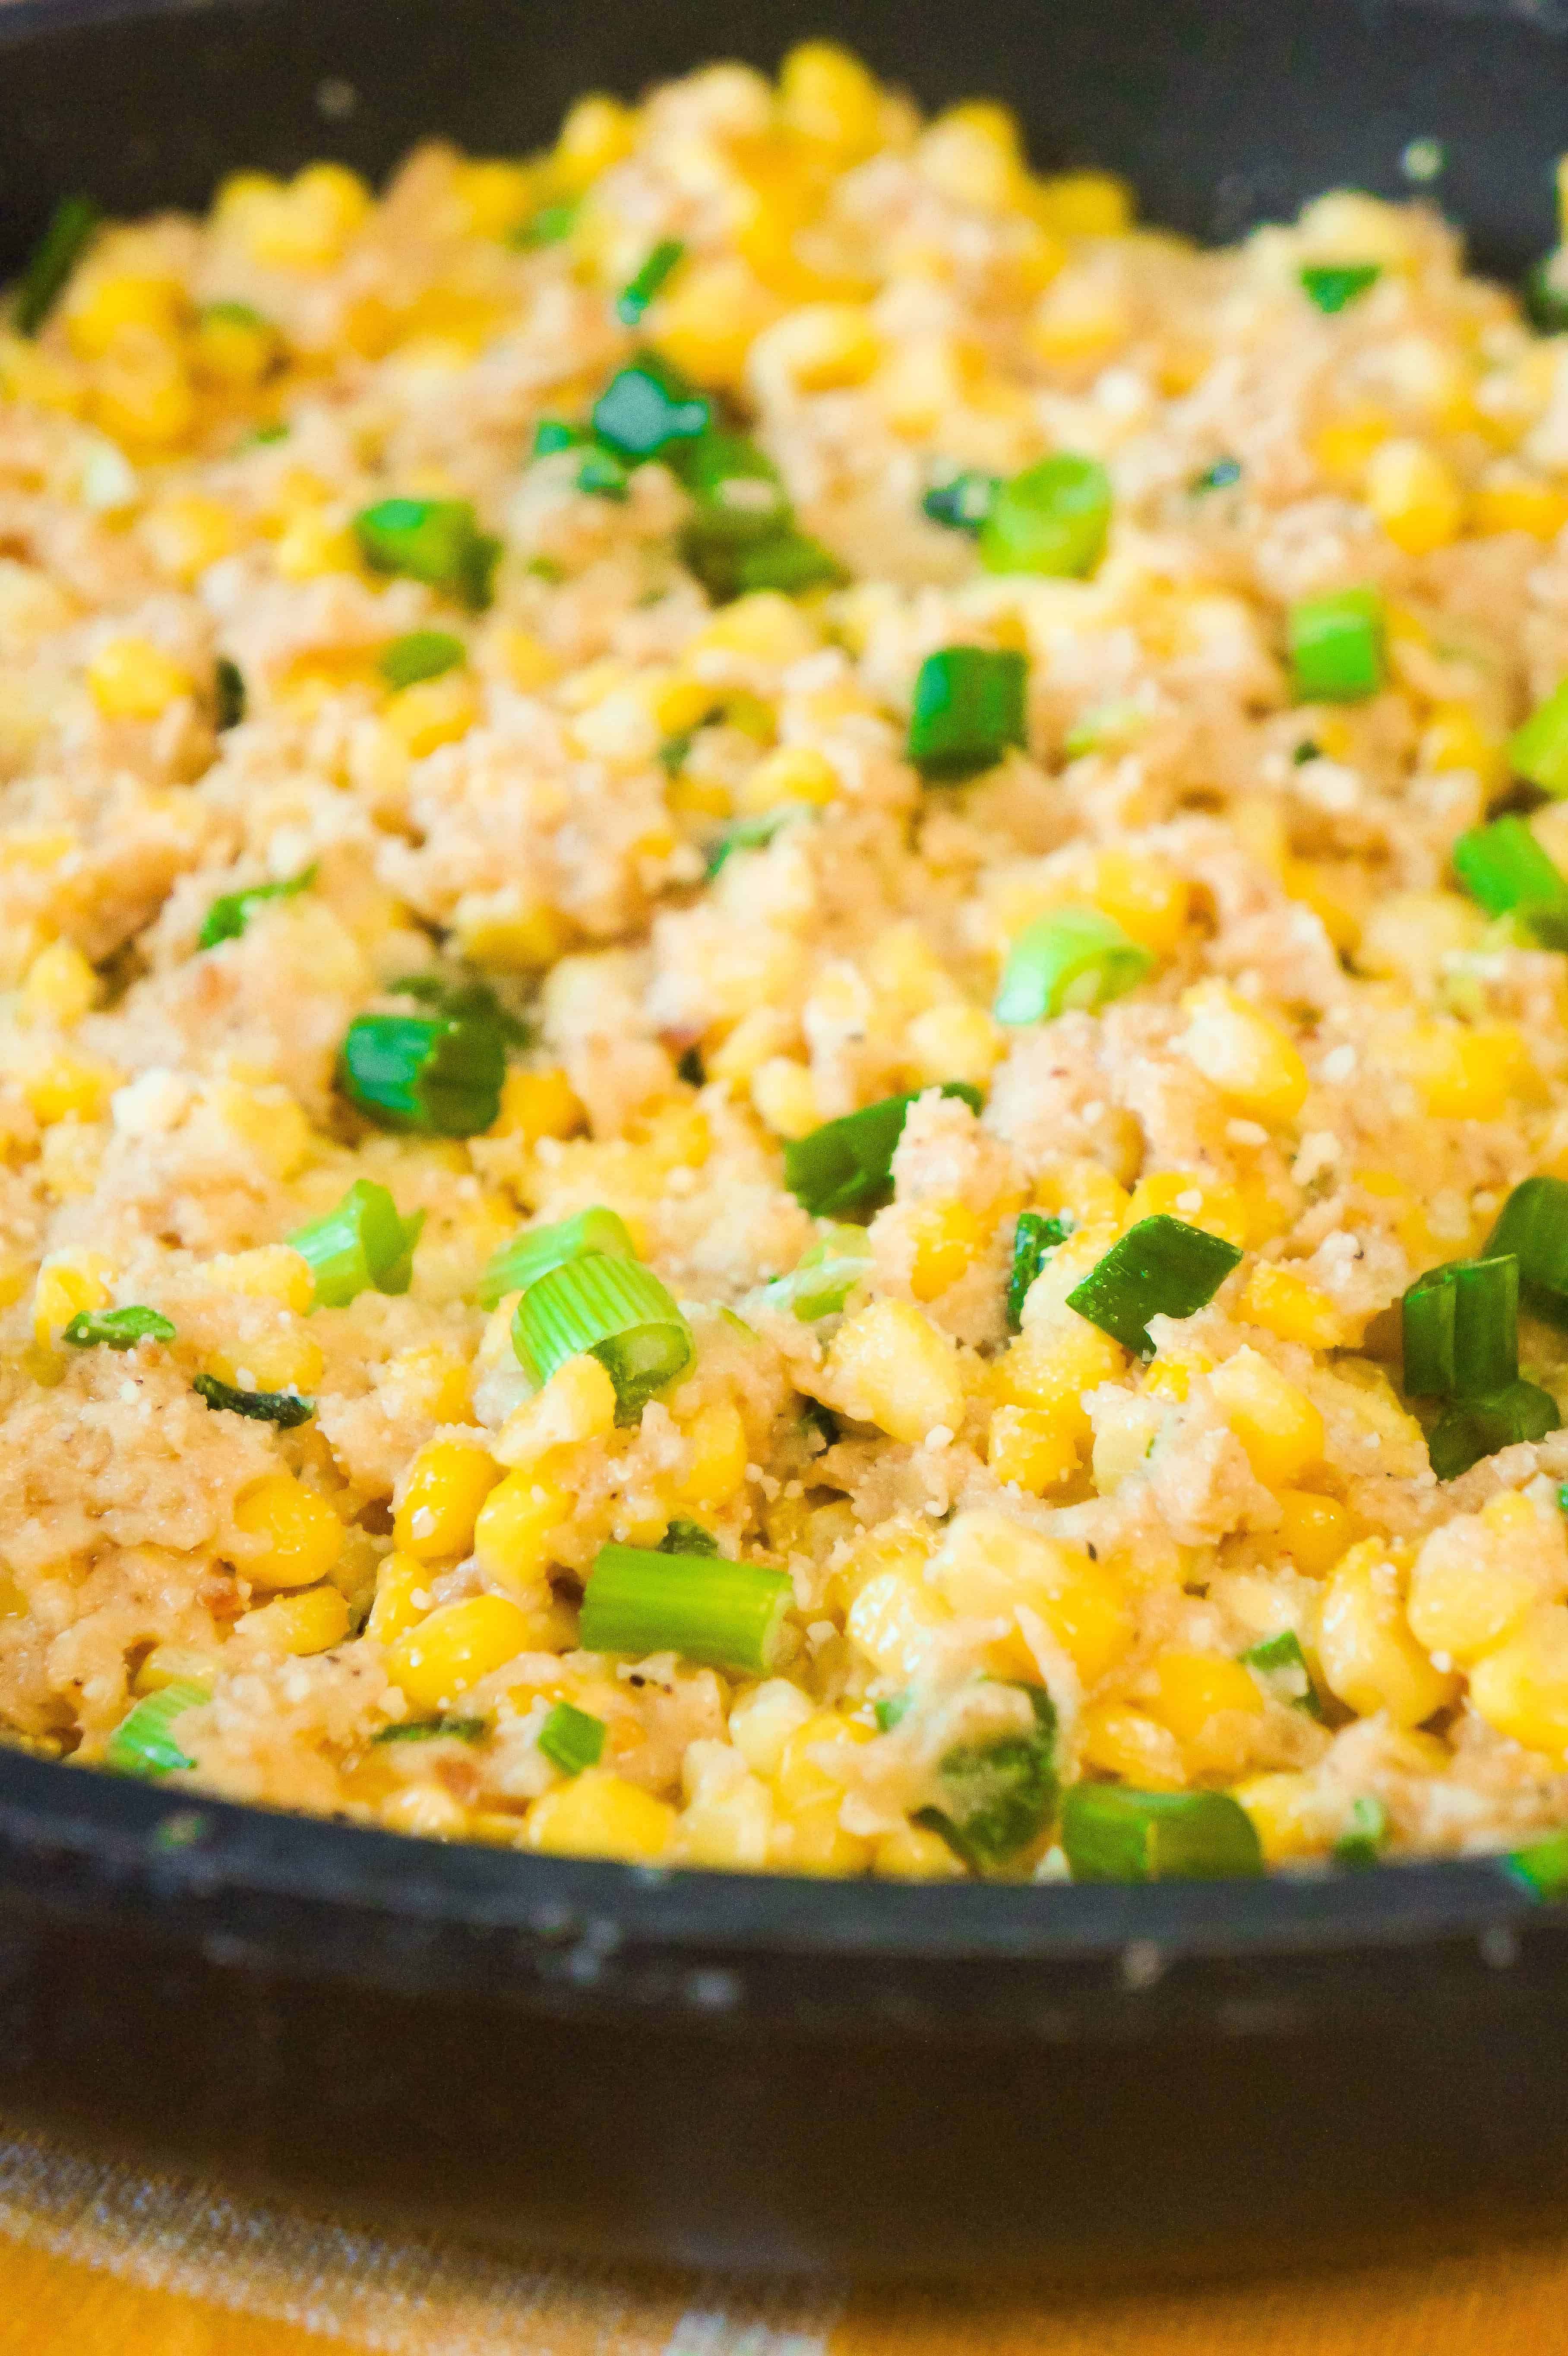 Corn Side Dish loaded with Ritz Cracker crumbs, Swiss cheese and Parmesan.